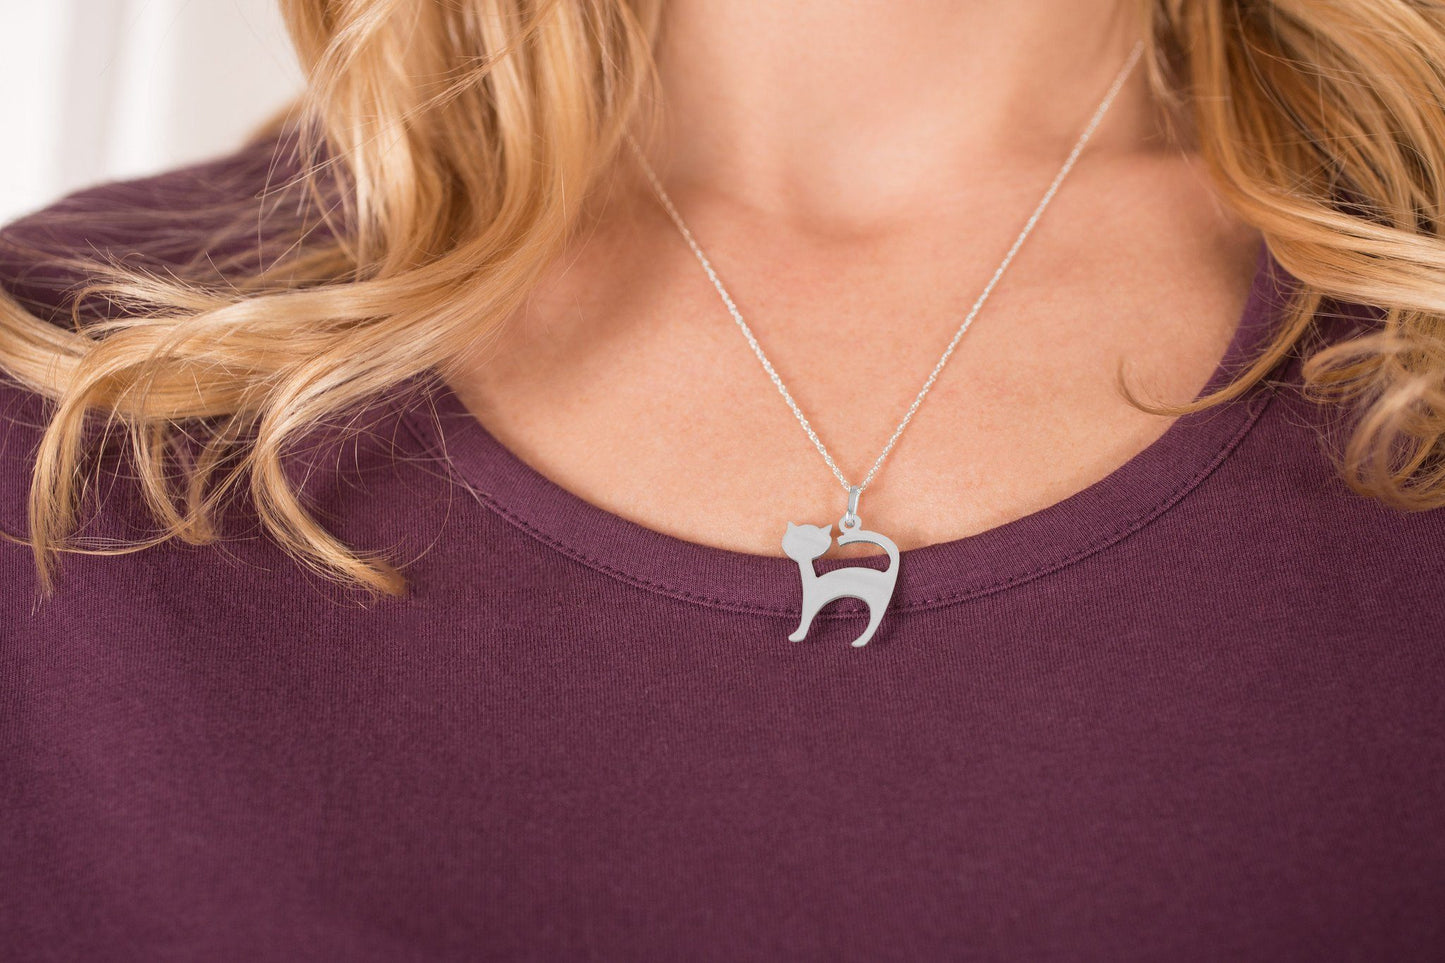 Cat Sterling Silhouette Necklace